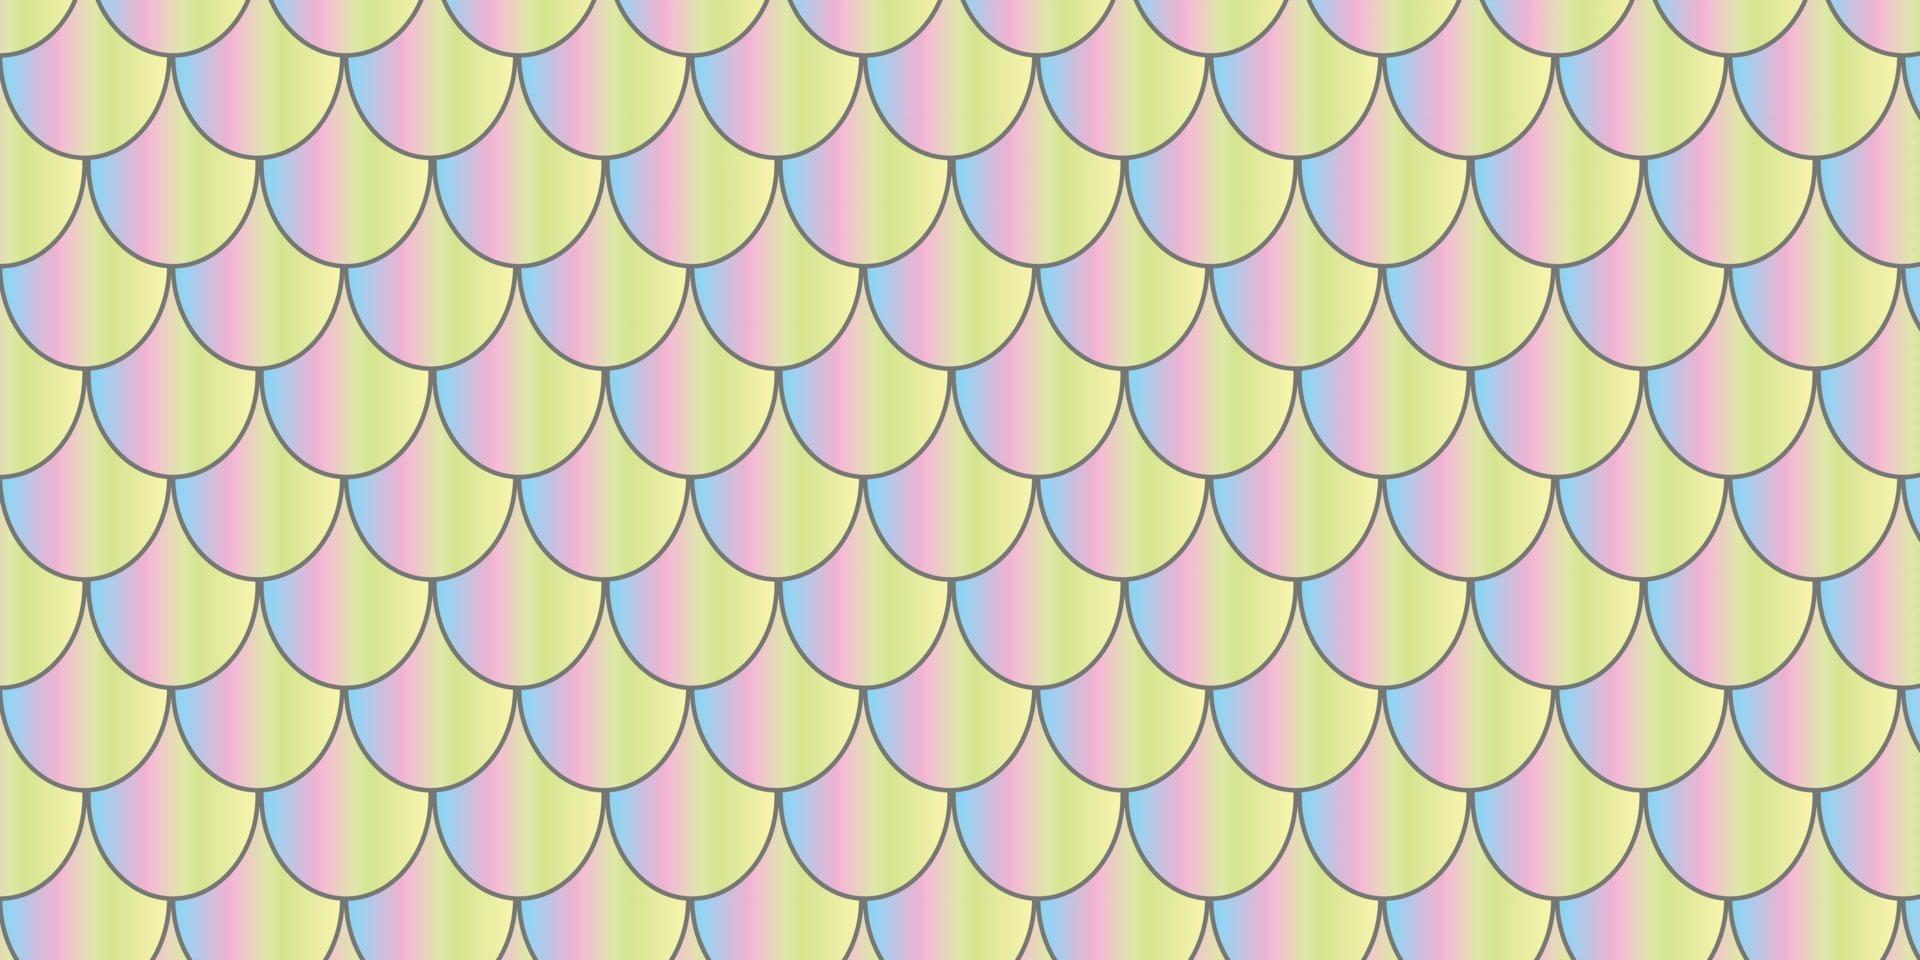 seamless pattern with Fish Scales pro vector